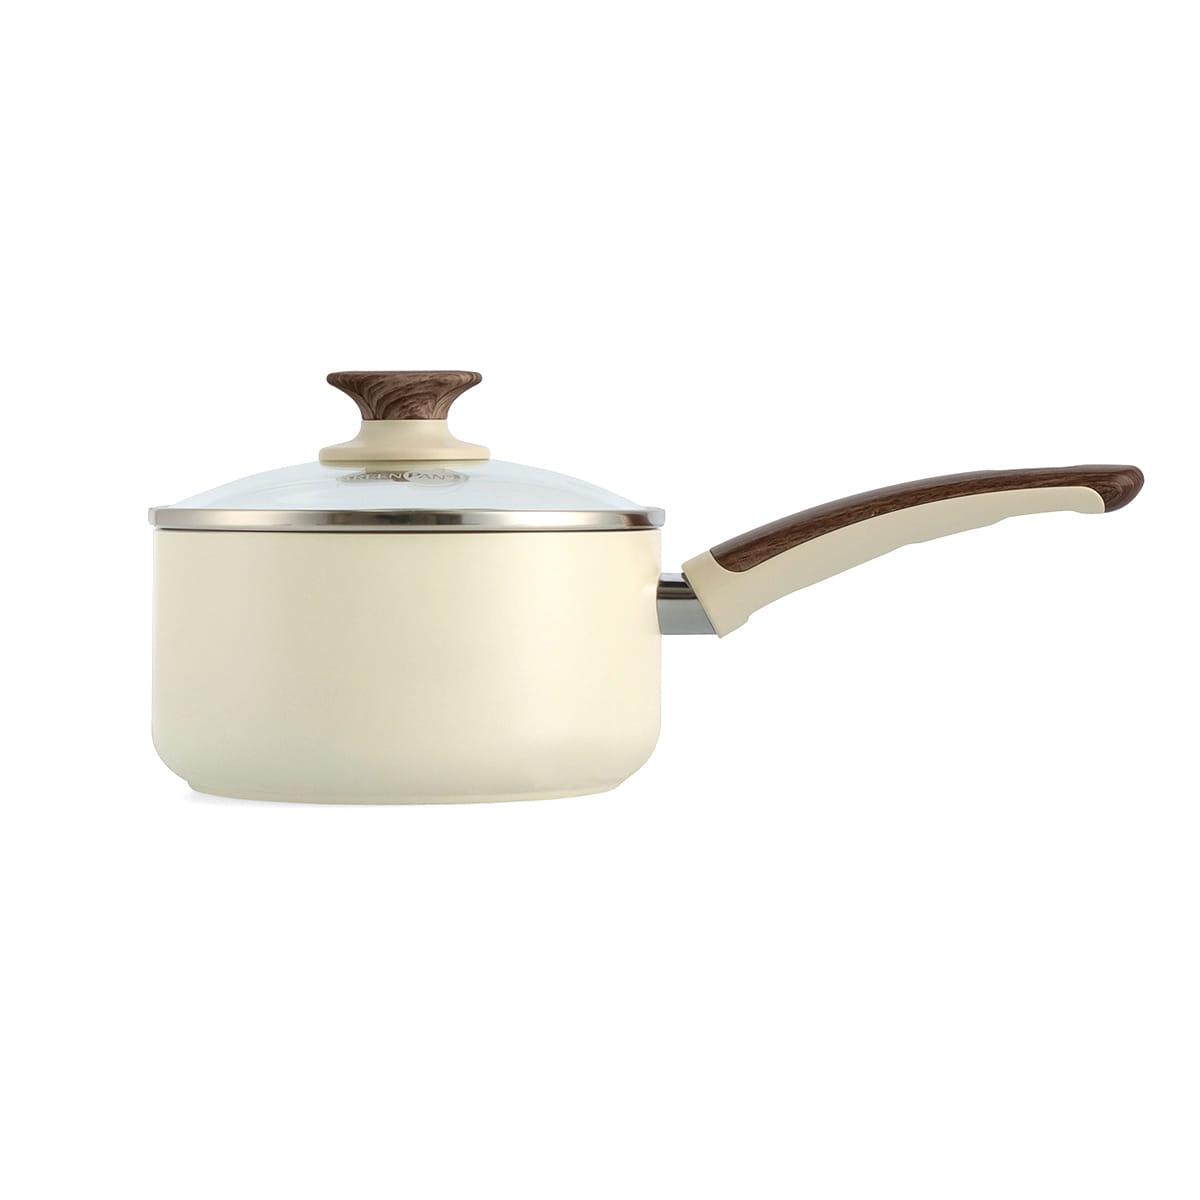 Wood-Be<br> Saucepan with Lid, Cream White - 16cm